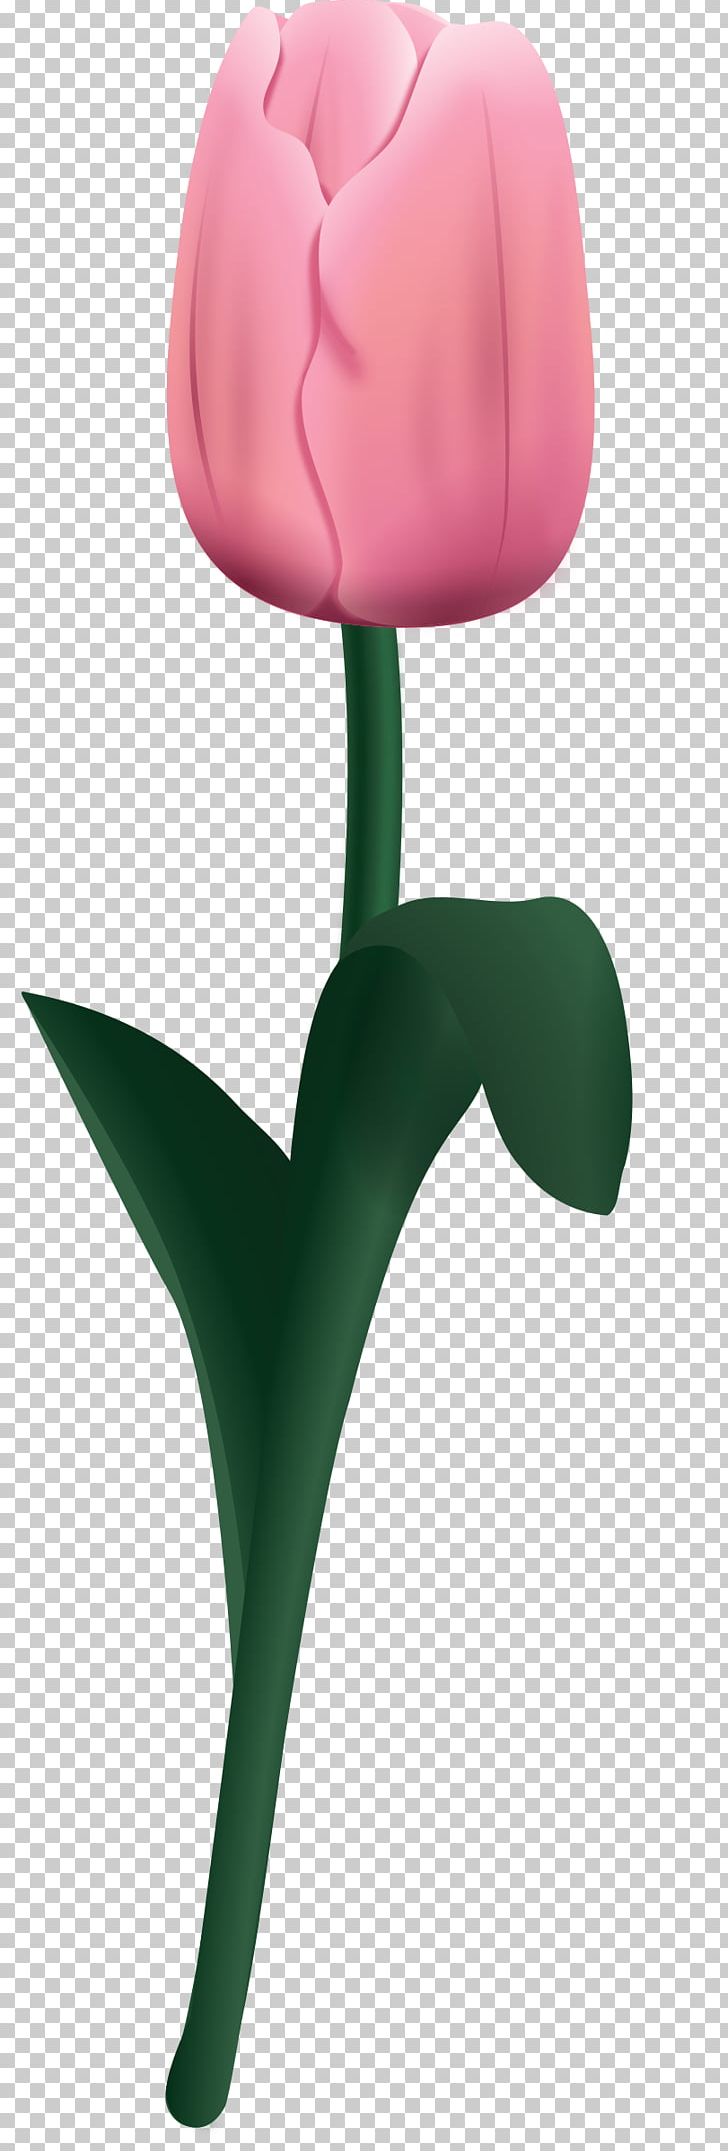 Drawing Tulip Flower PNG, Clipart, Blossoms, Download, Drawing, Encapsulated Postscript, Facebook Free PNG Download